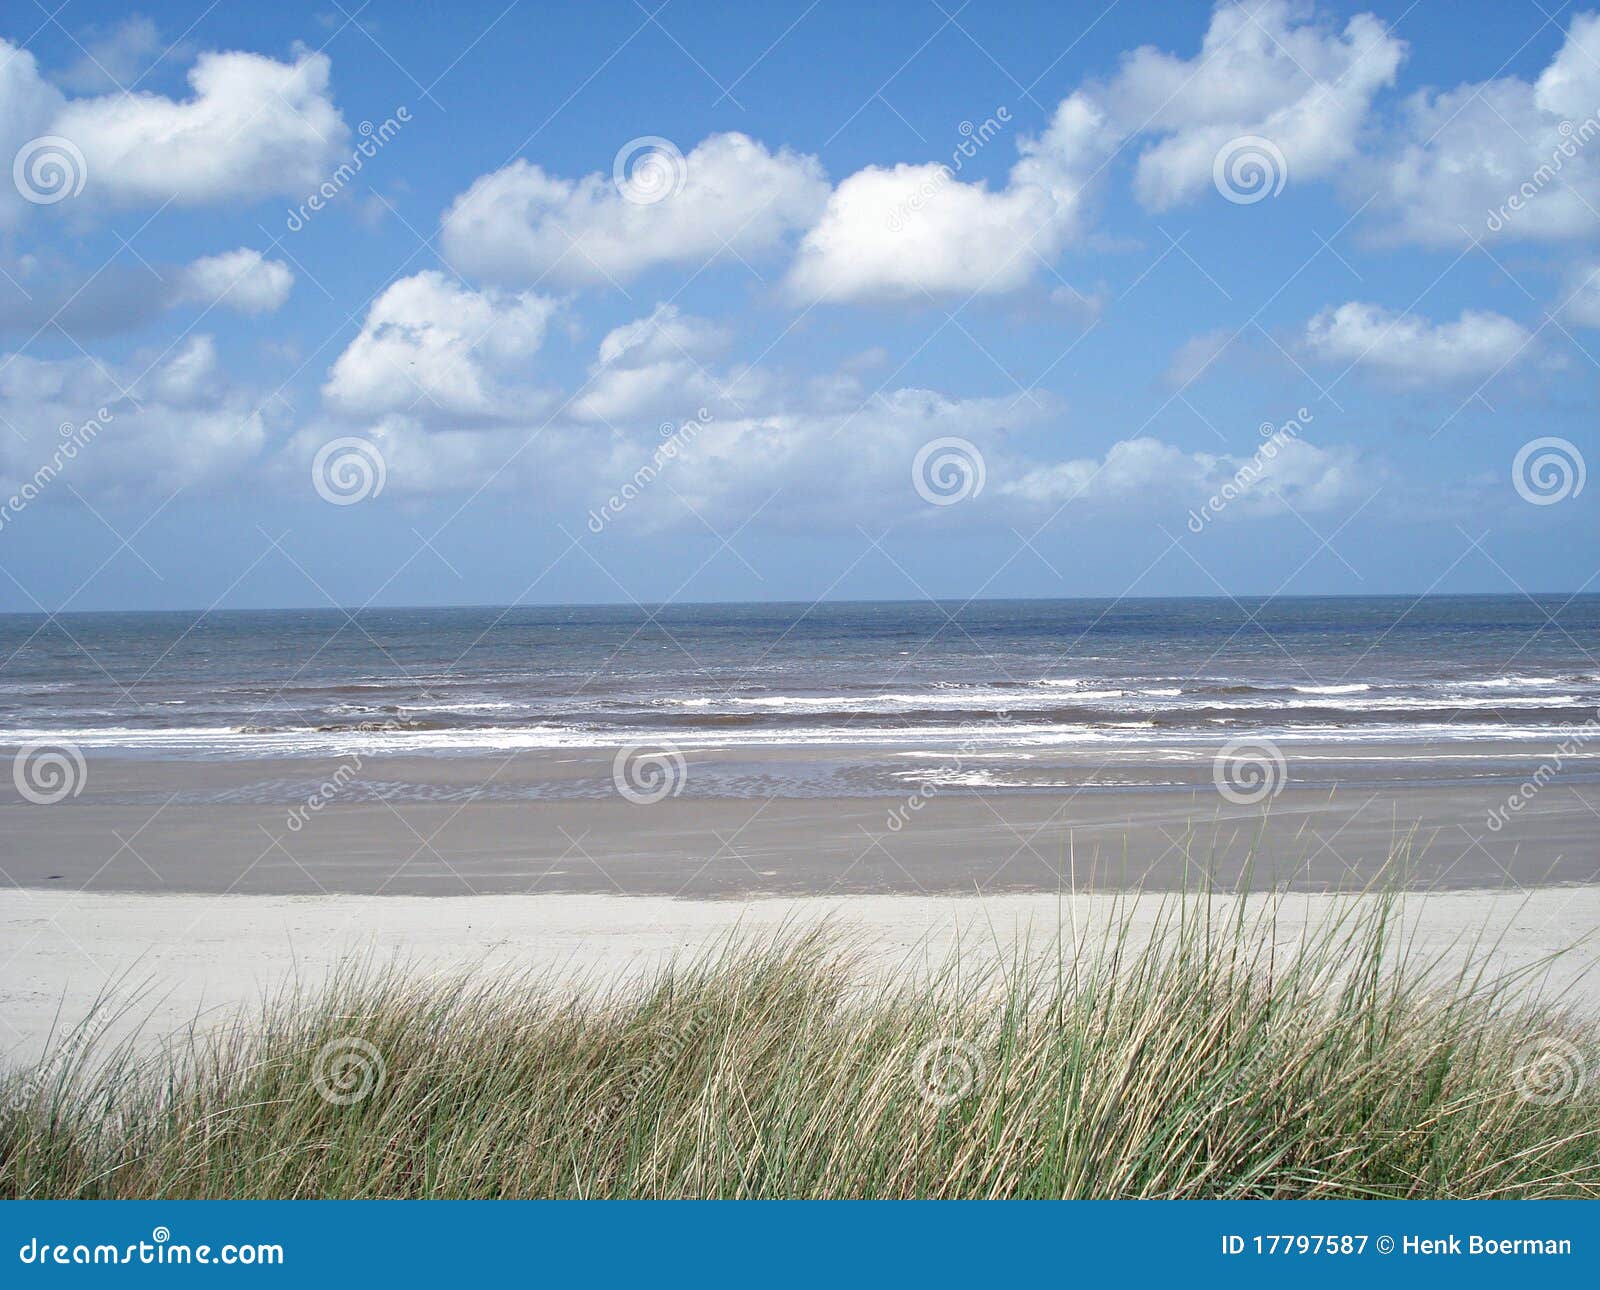 beach with clouds and blue skie